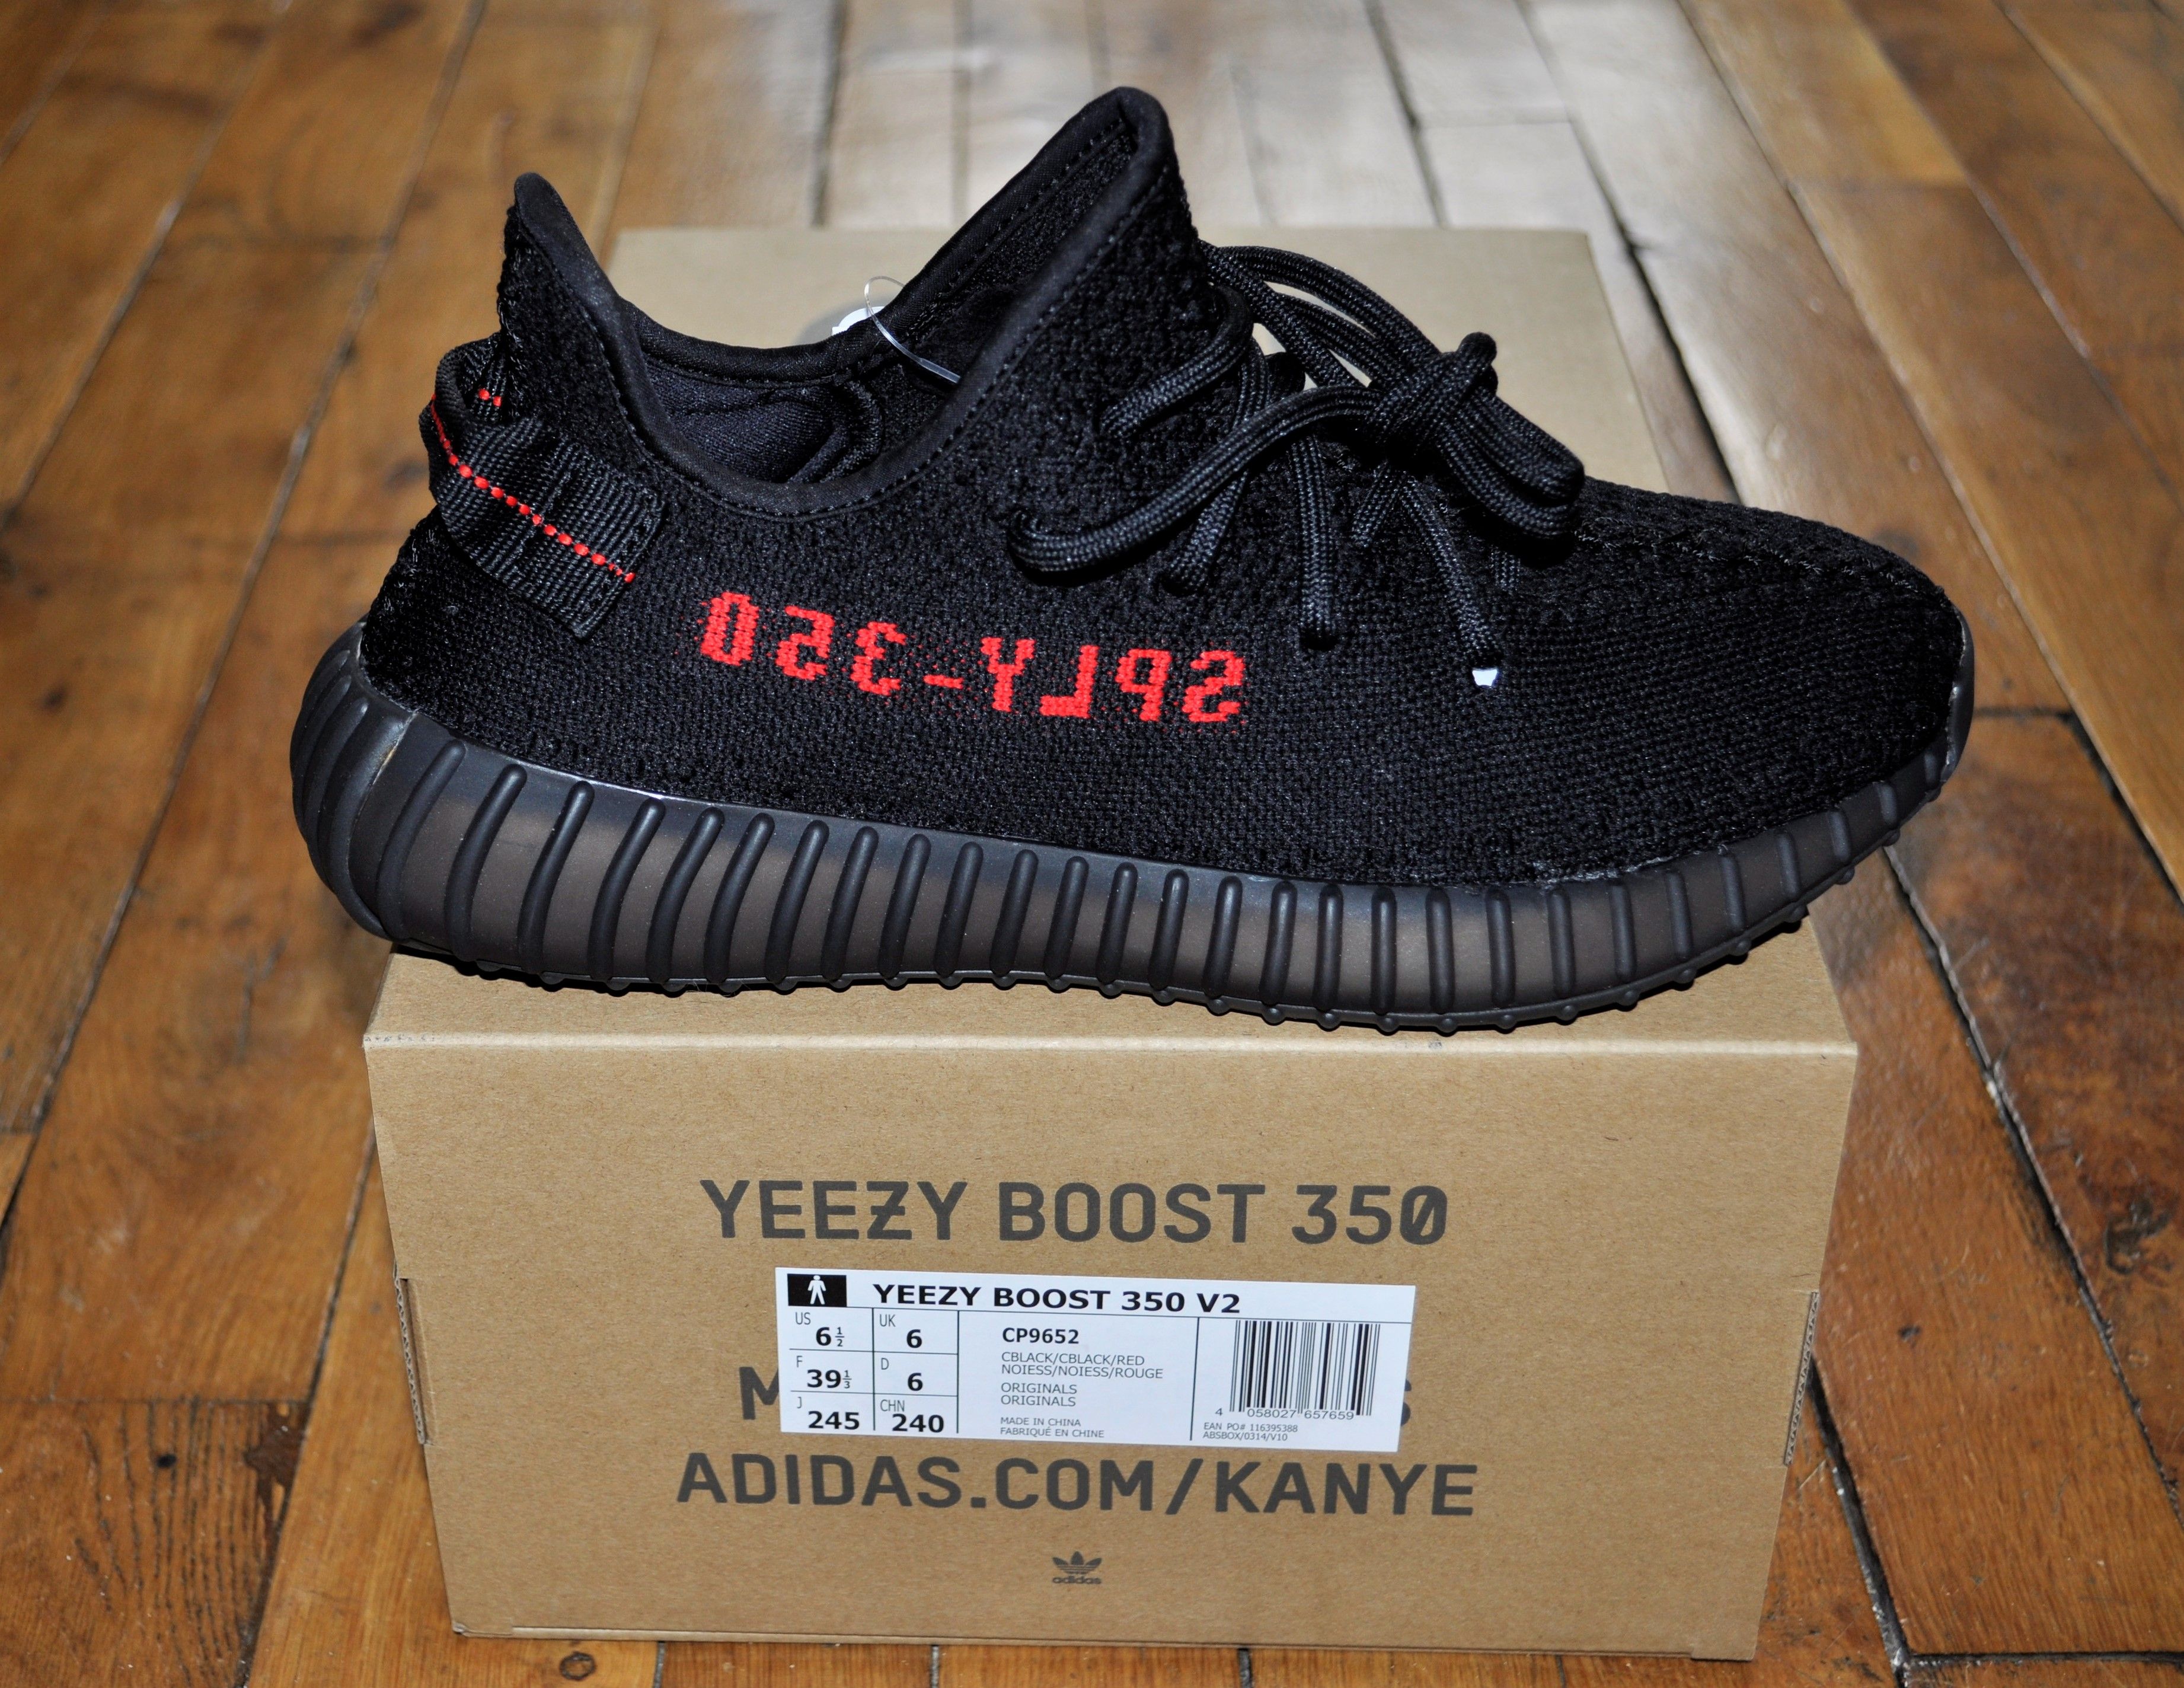 Adidas Adidas Yeezy 350 V2 Bred Black Red CP9652 Size 6,5 6 Uk 39 1/3 Eu Grailed